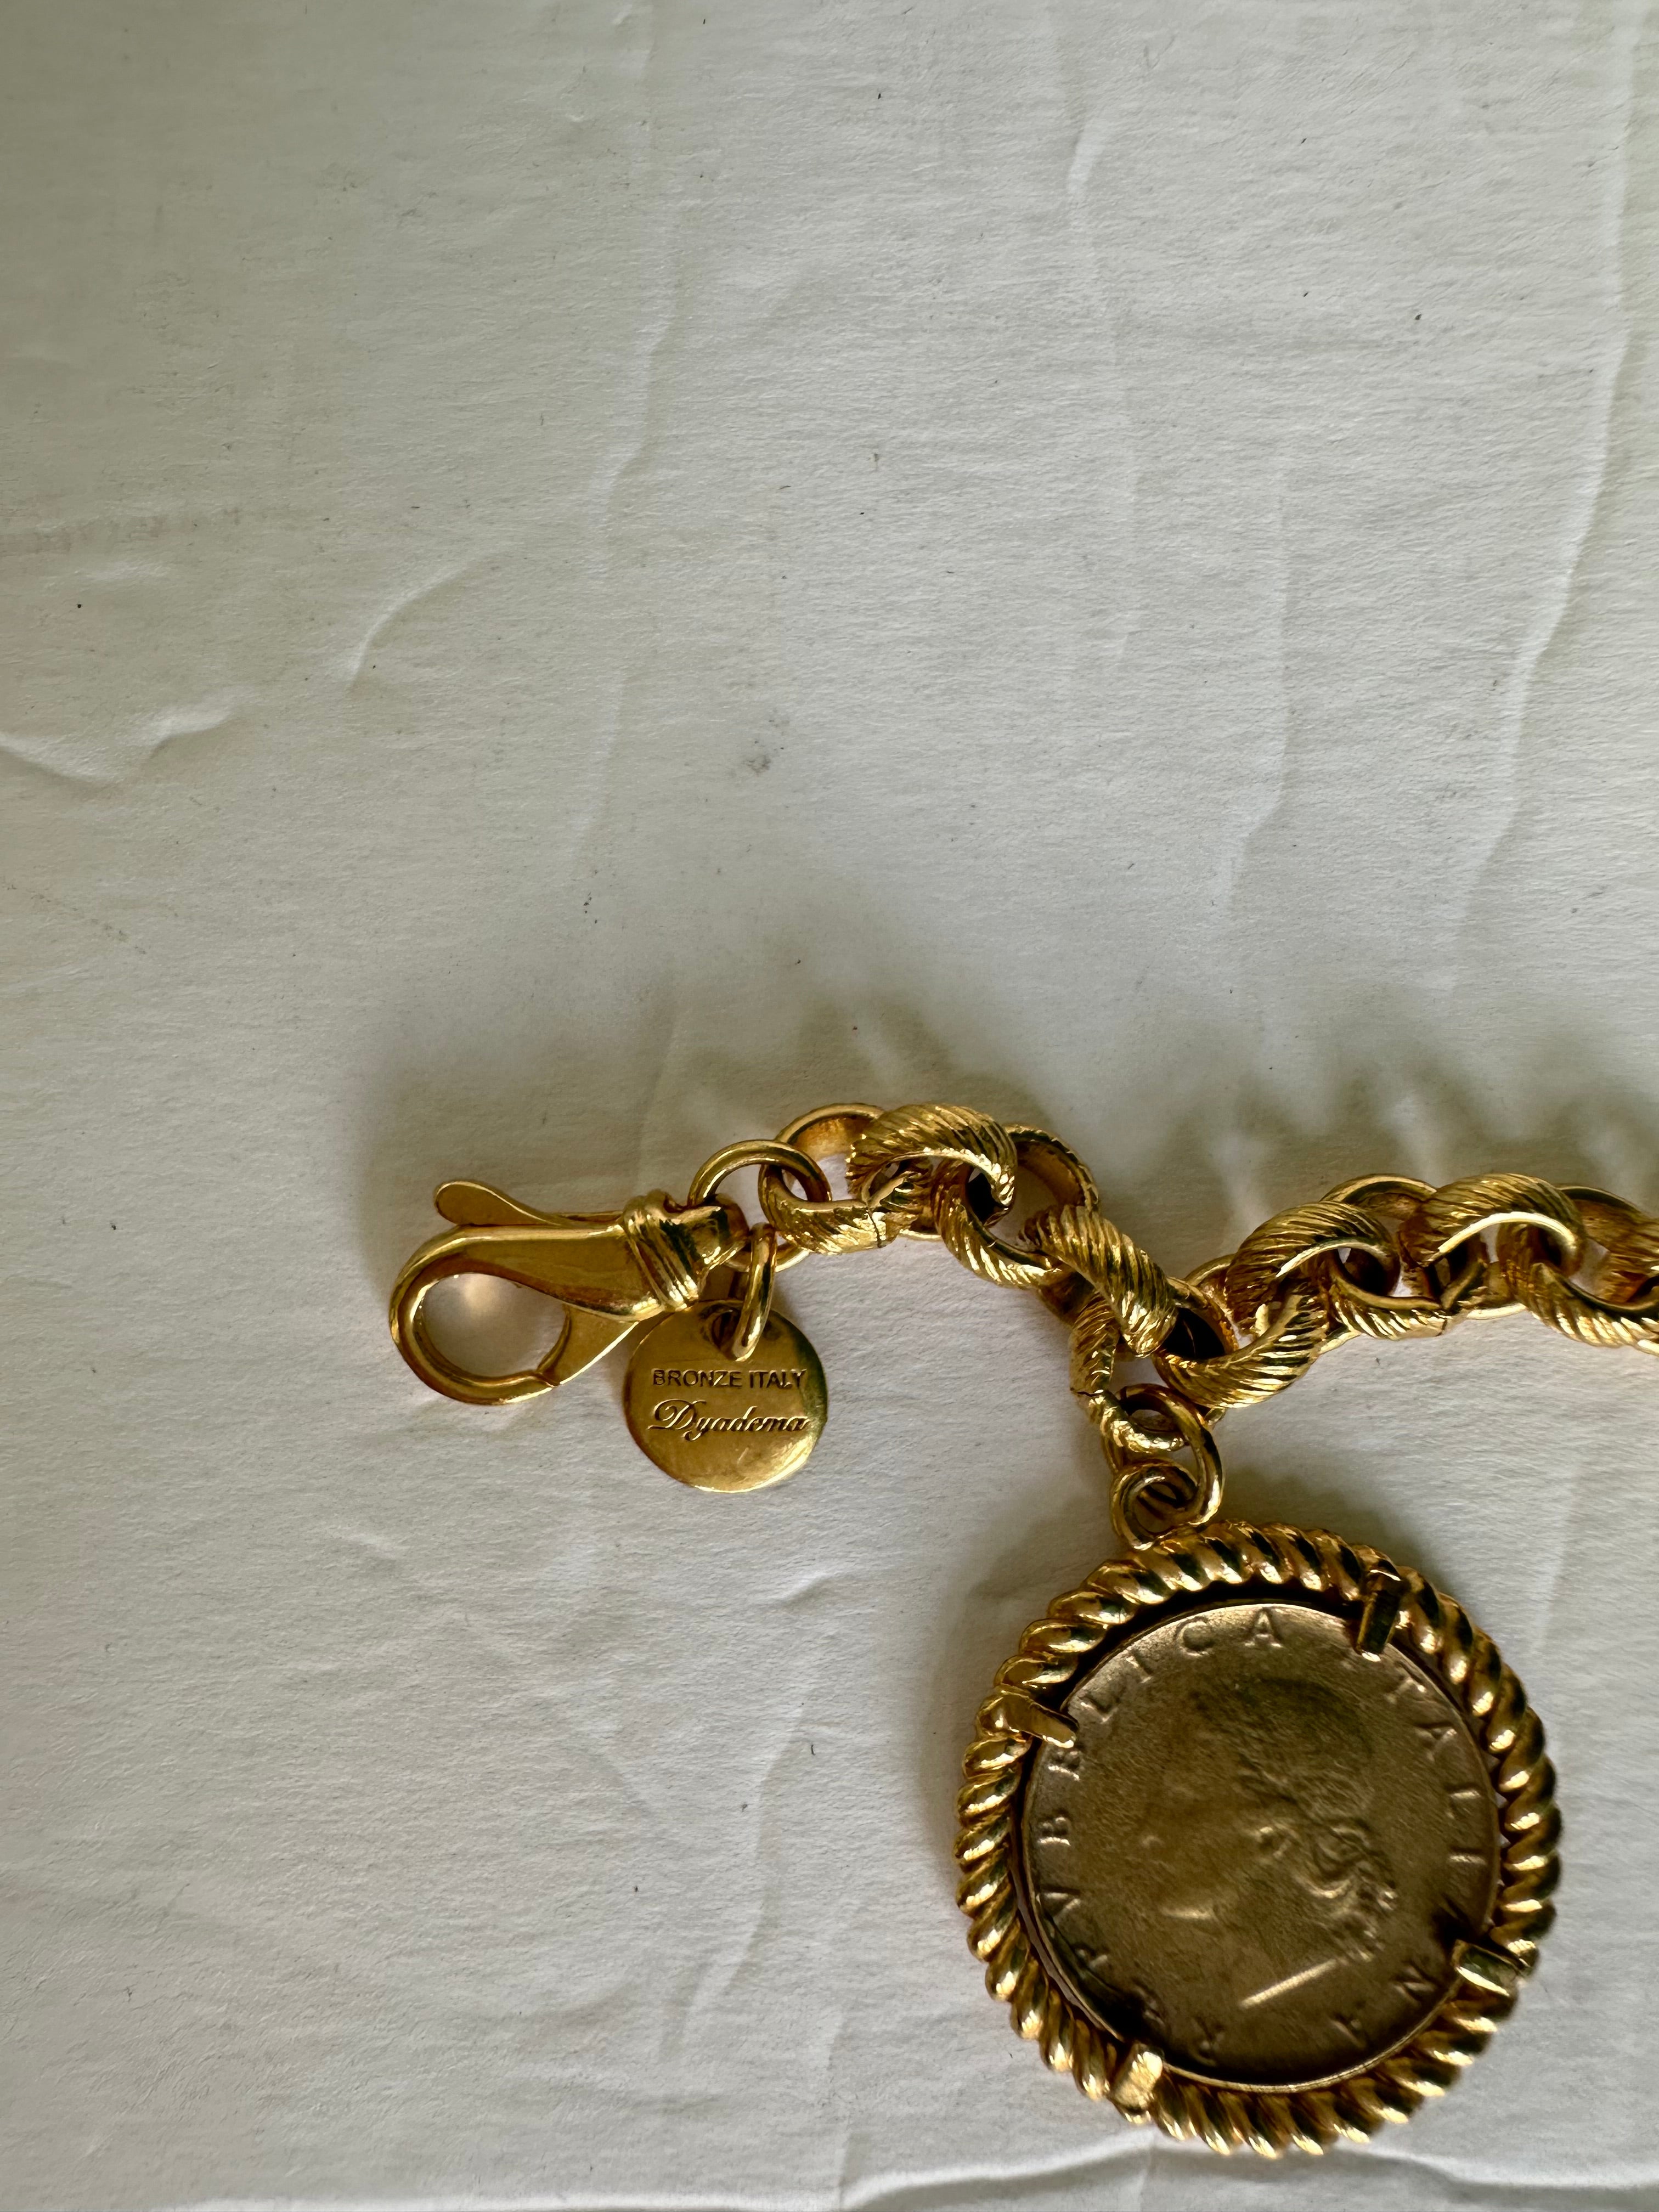 Vintage Dyadema Italy signed gold chain link with coin dangle/charm bracelet.